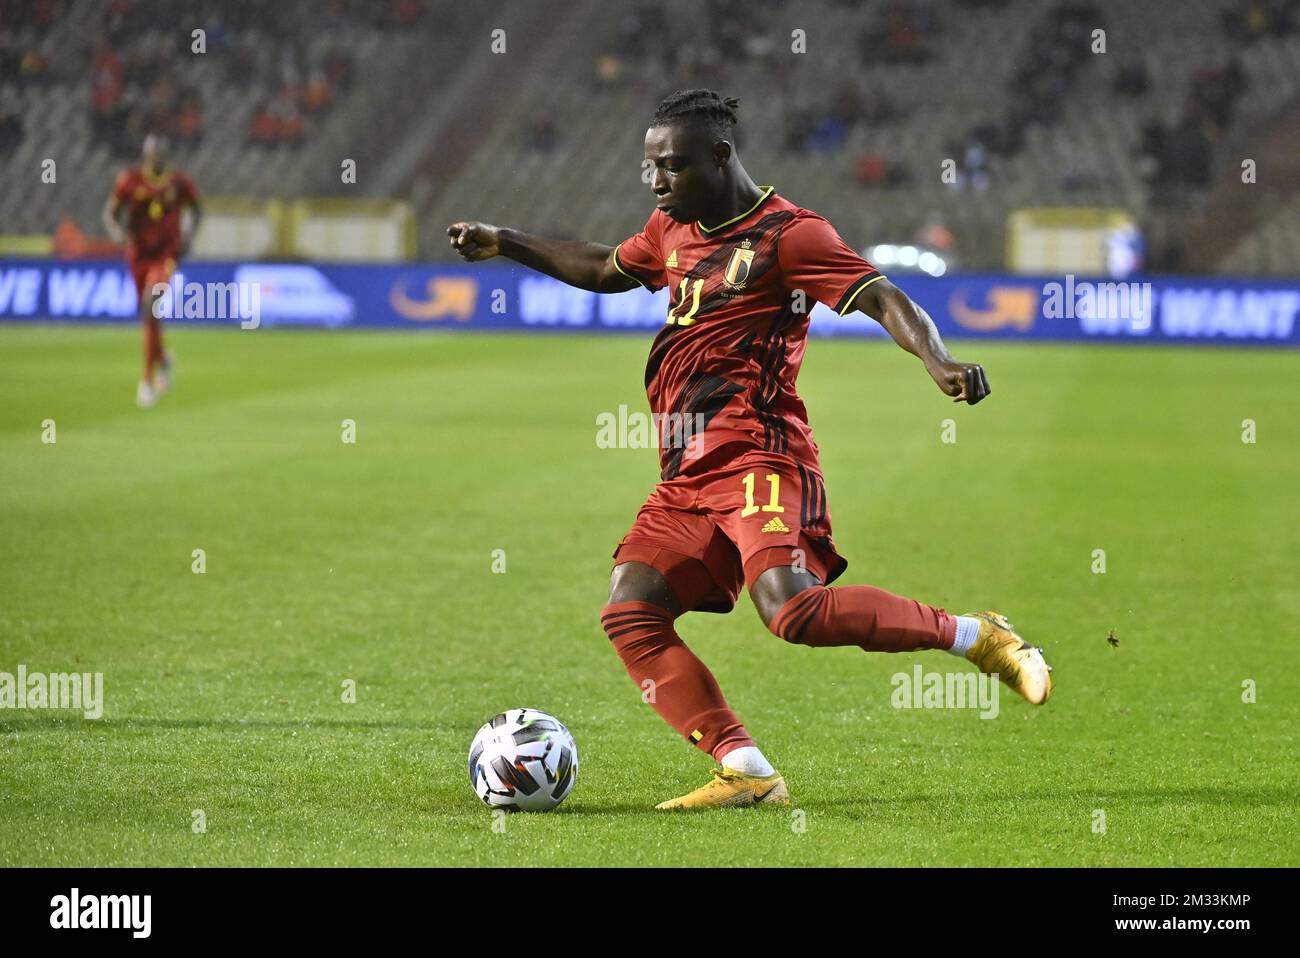 Belgium's Jeremy Doku in action with the ball at a friendly game between the Belgian national soccer team Red Devils and Ivory Coast, Thursday 08 October 2020 in Brussels. BELGA PHOTO DIRK WAEM  Stock Photo